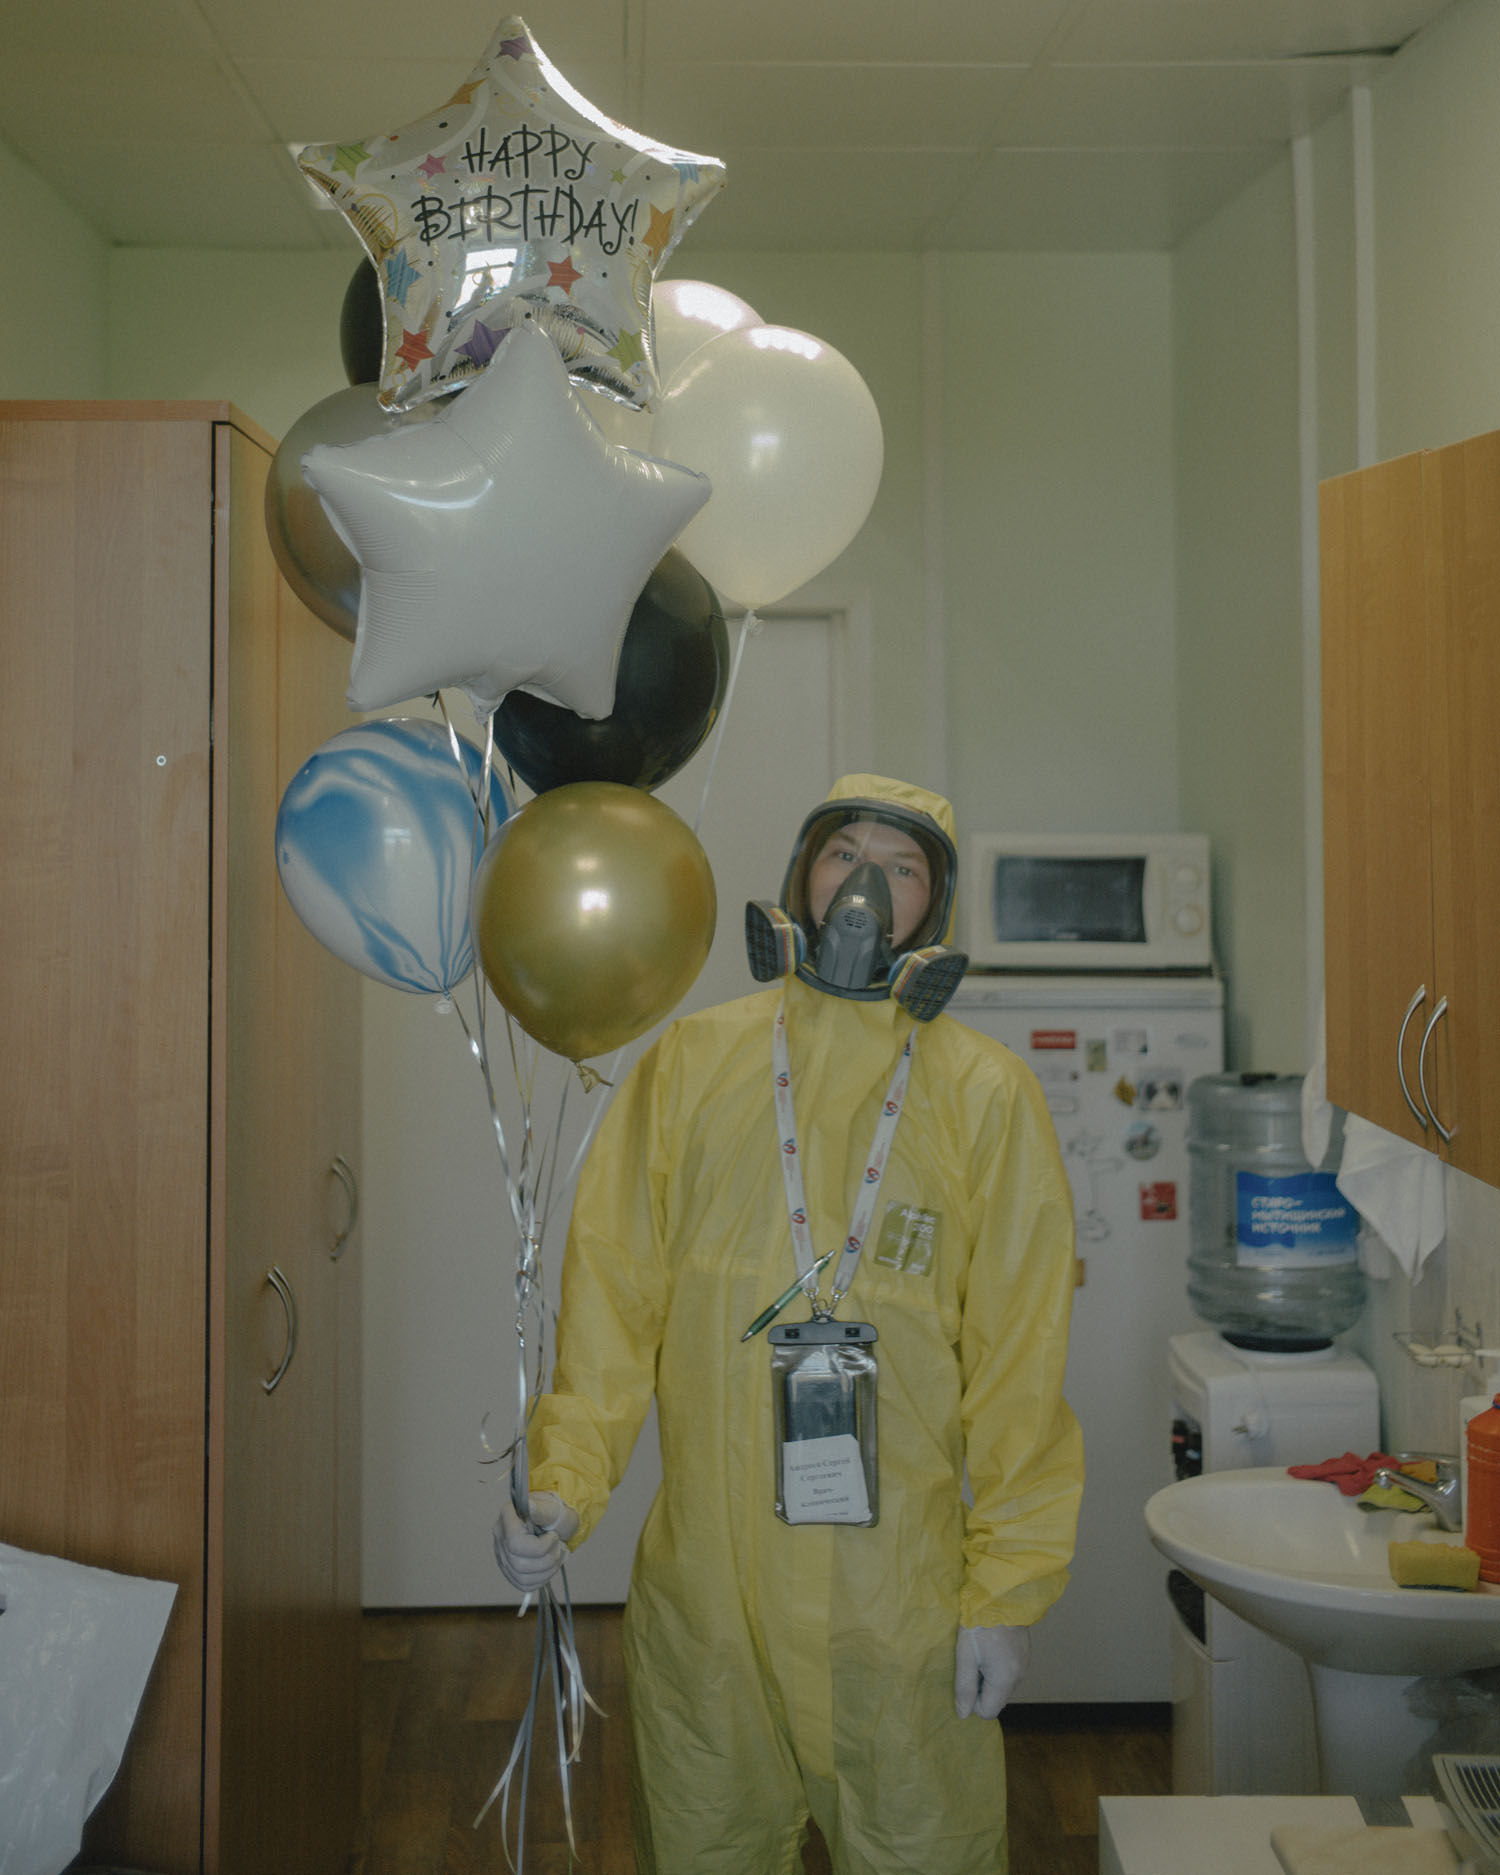 Doctor Sergey Andreev with balloons given to him on his birthday. From the series Just Stand and Look by Nanna Heitmann (2020). Image: Magnum Photos 